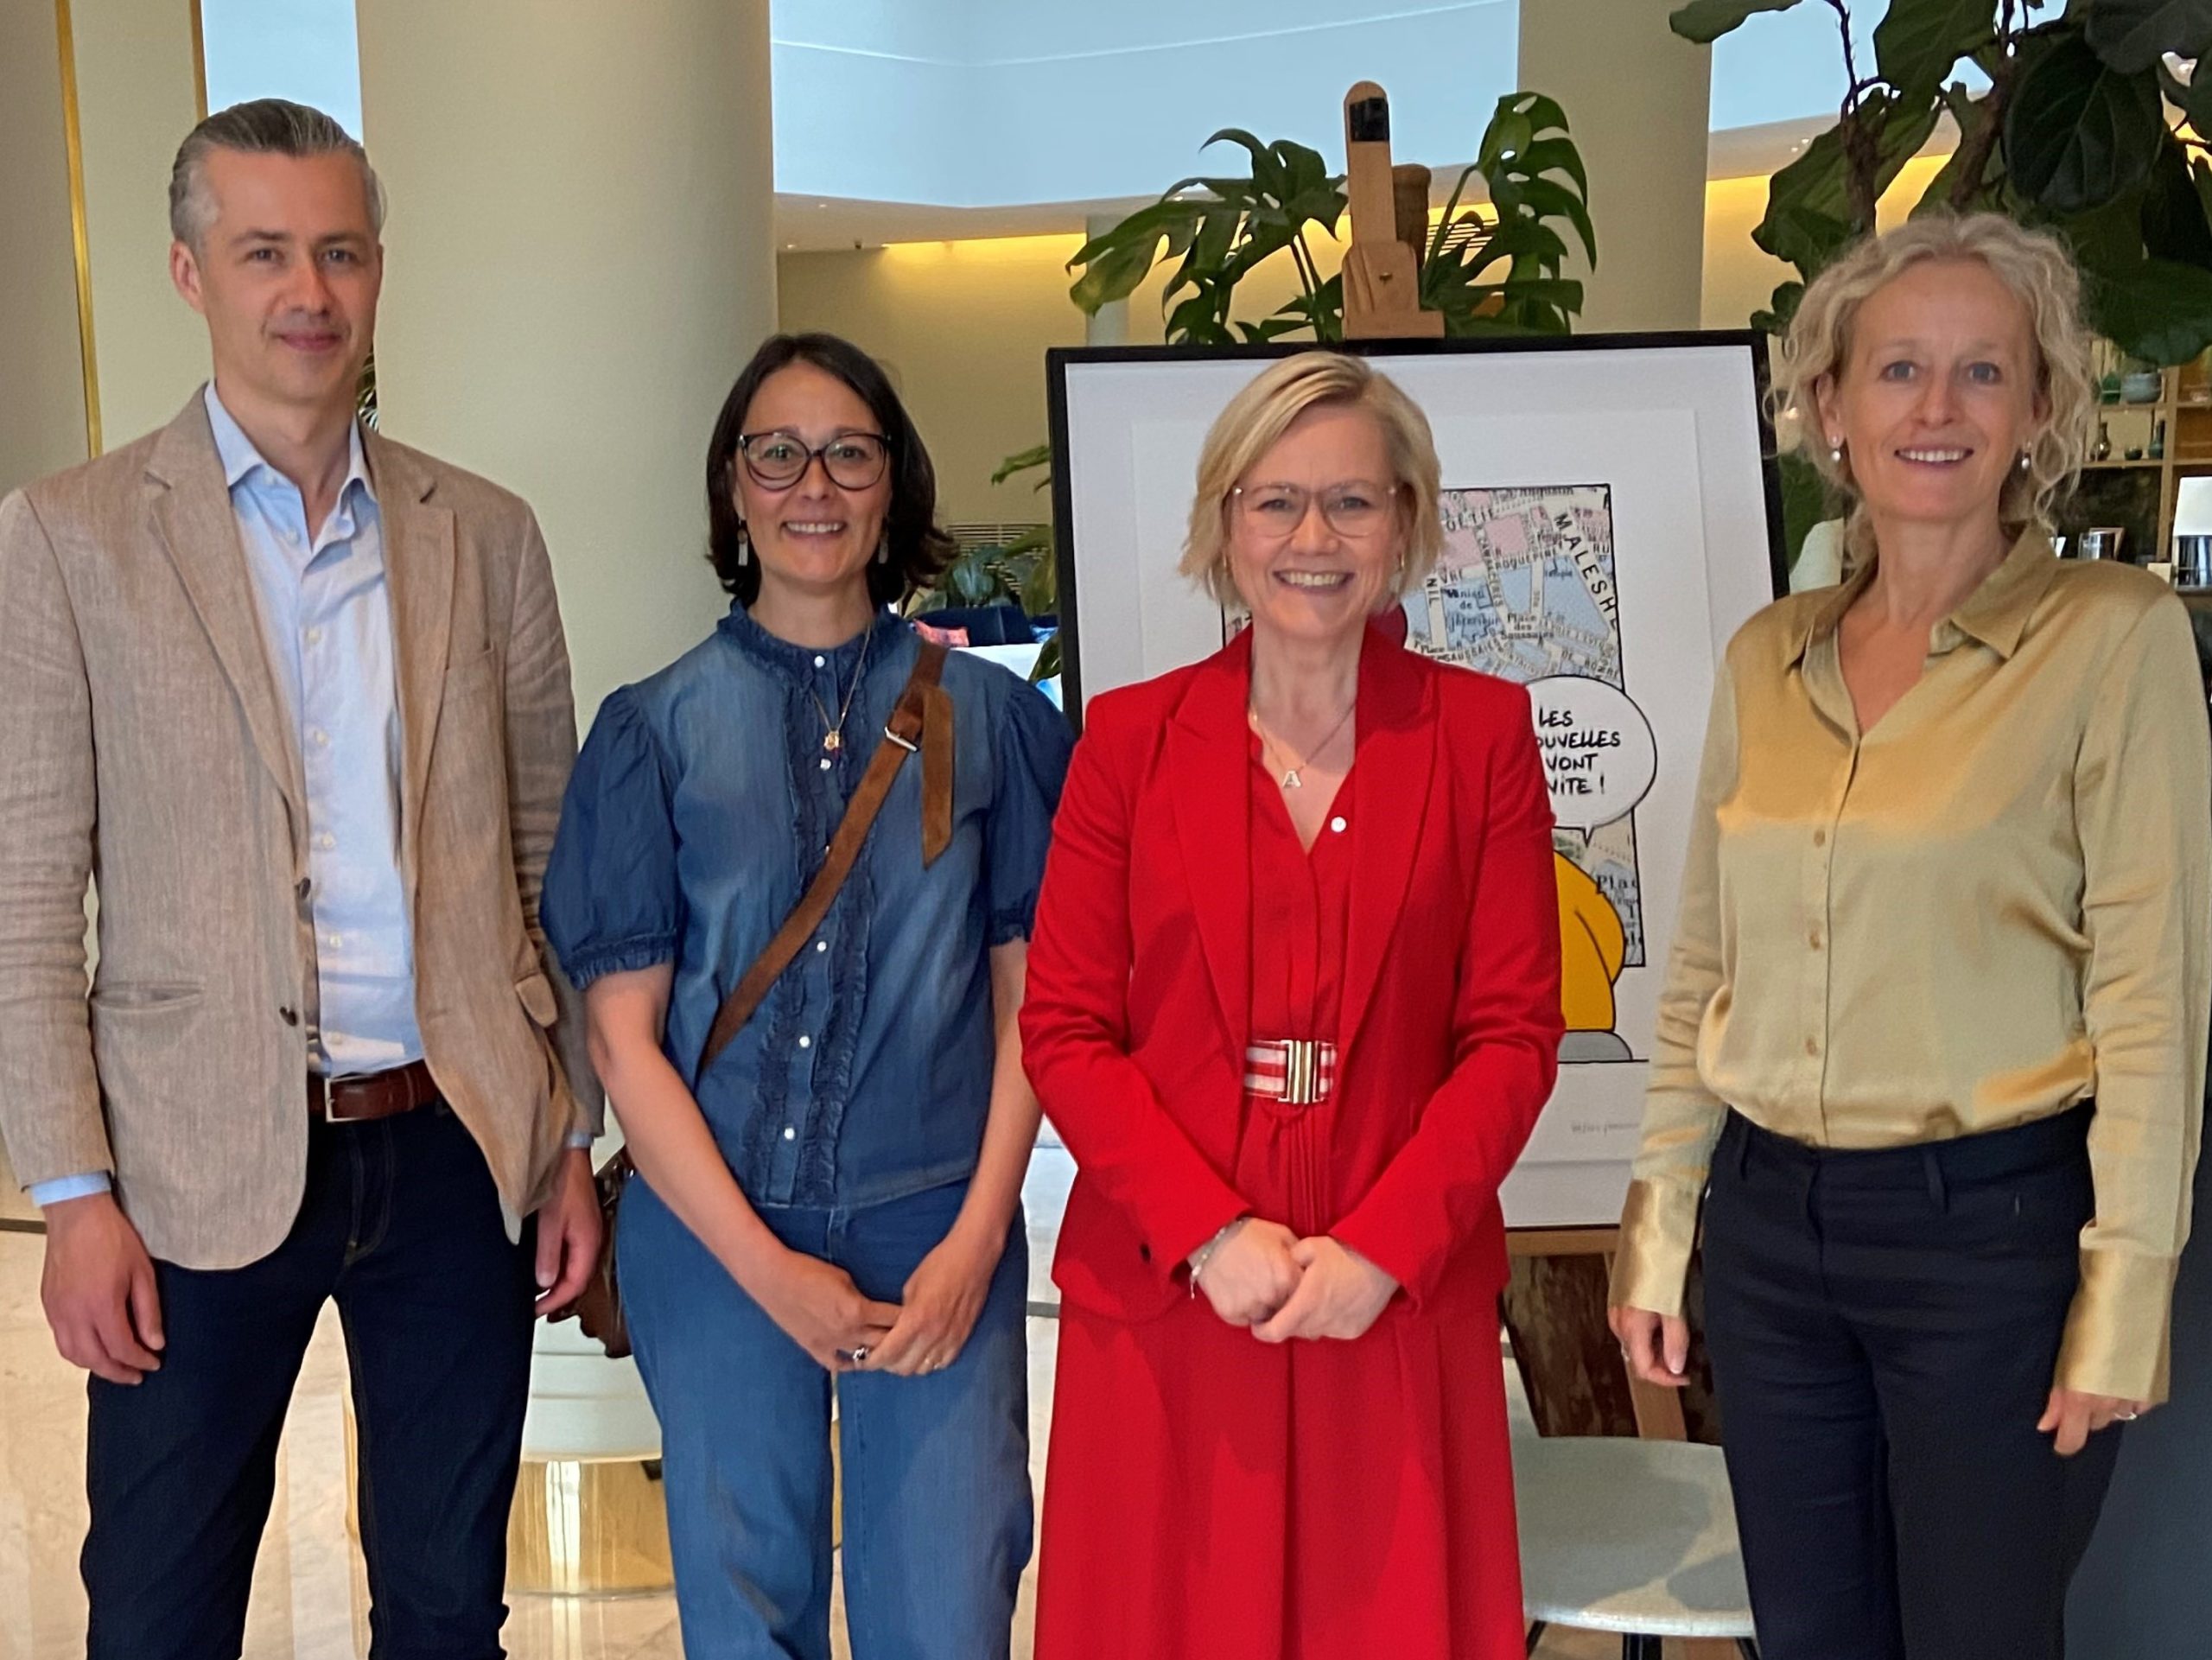 EuroHealthNet Director Caroline Costongs met with  Norwegian Minister of Health Ingvild Kjerkol and representatives of EPHA and Eurocare to discuss EU-level opportunities to address NCDs. (Click to enlarge)